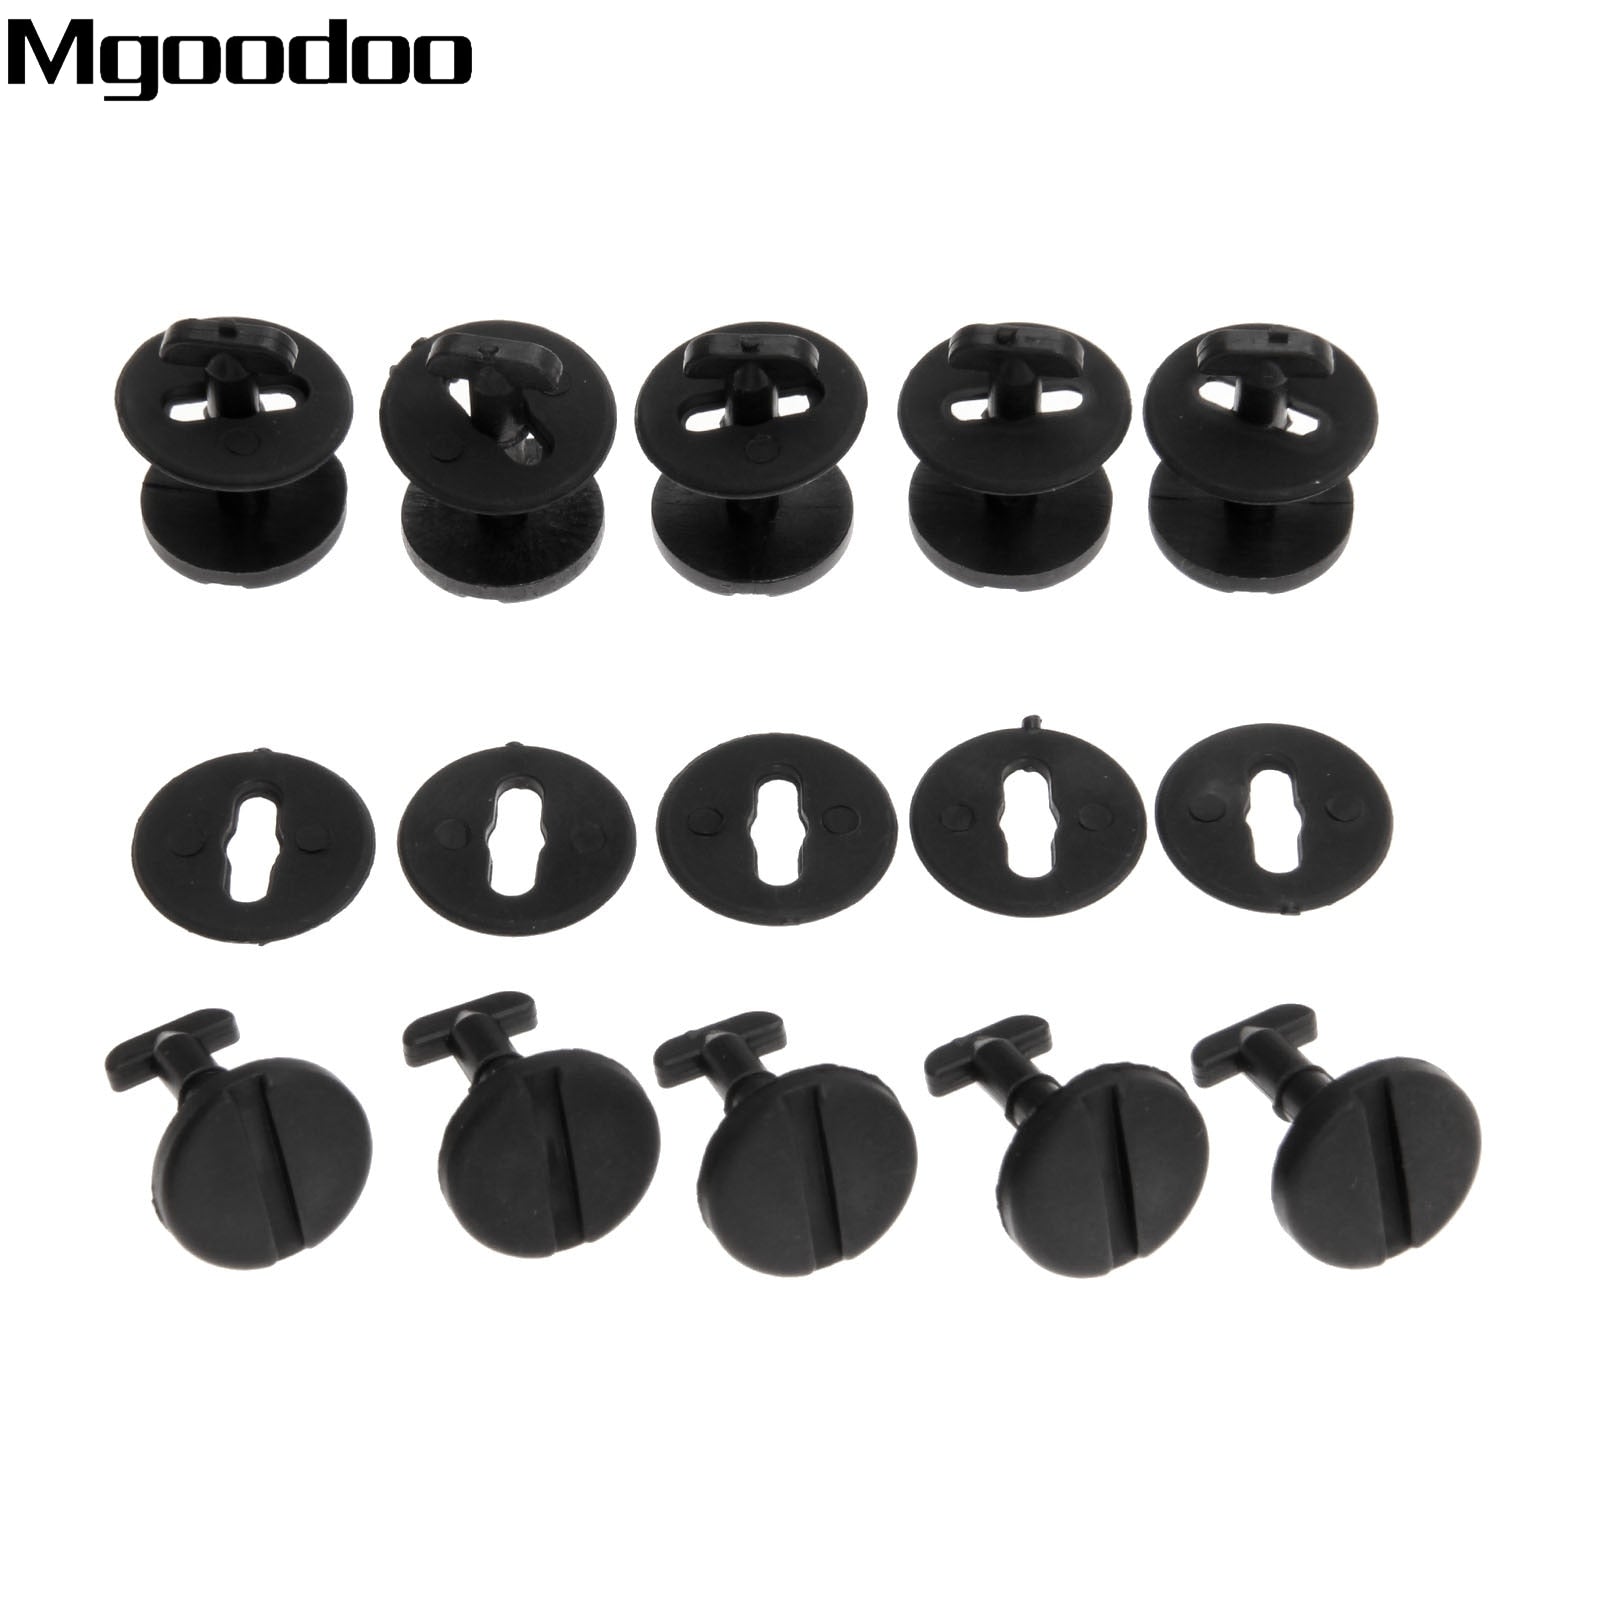 8 x Suitable for BMW Floor Carpet Mat Clips (Twist Lock With Washers) For BMW E36 E46 E38 E39